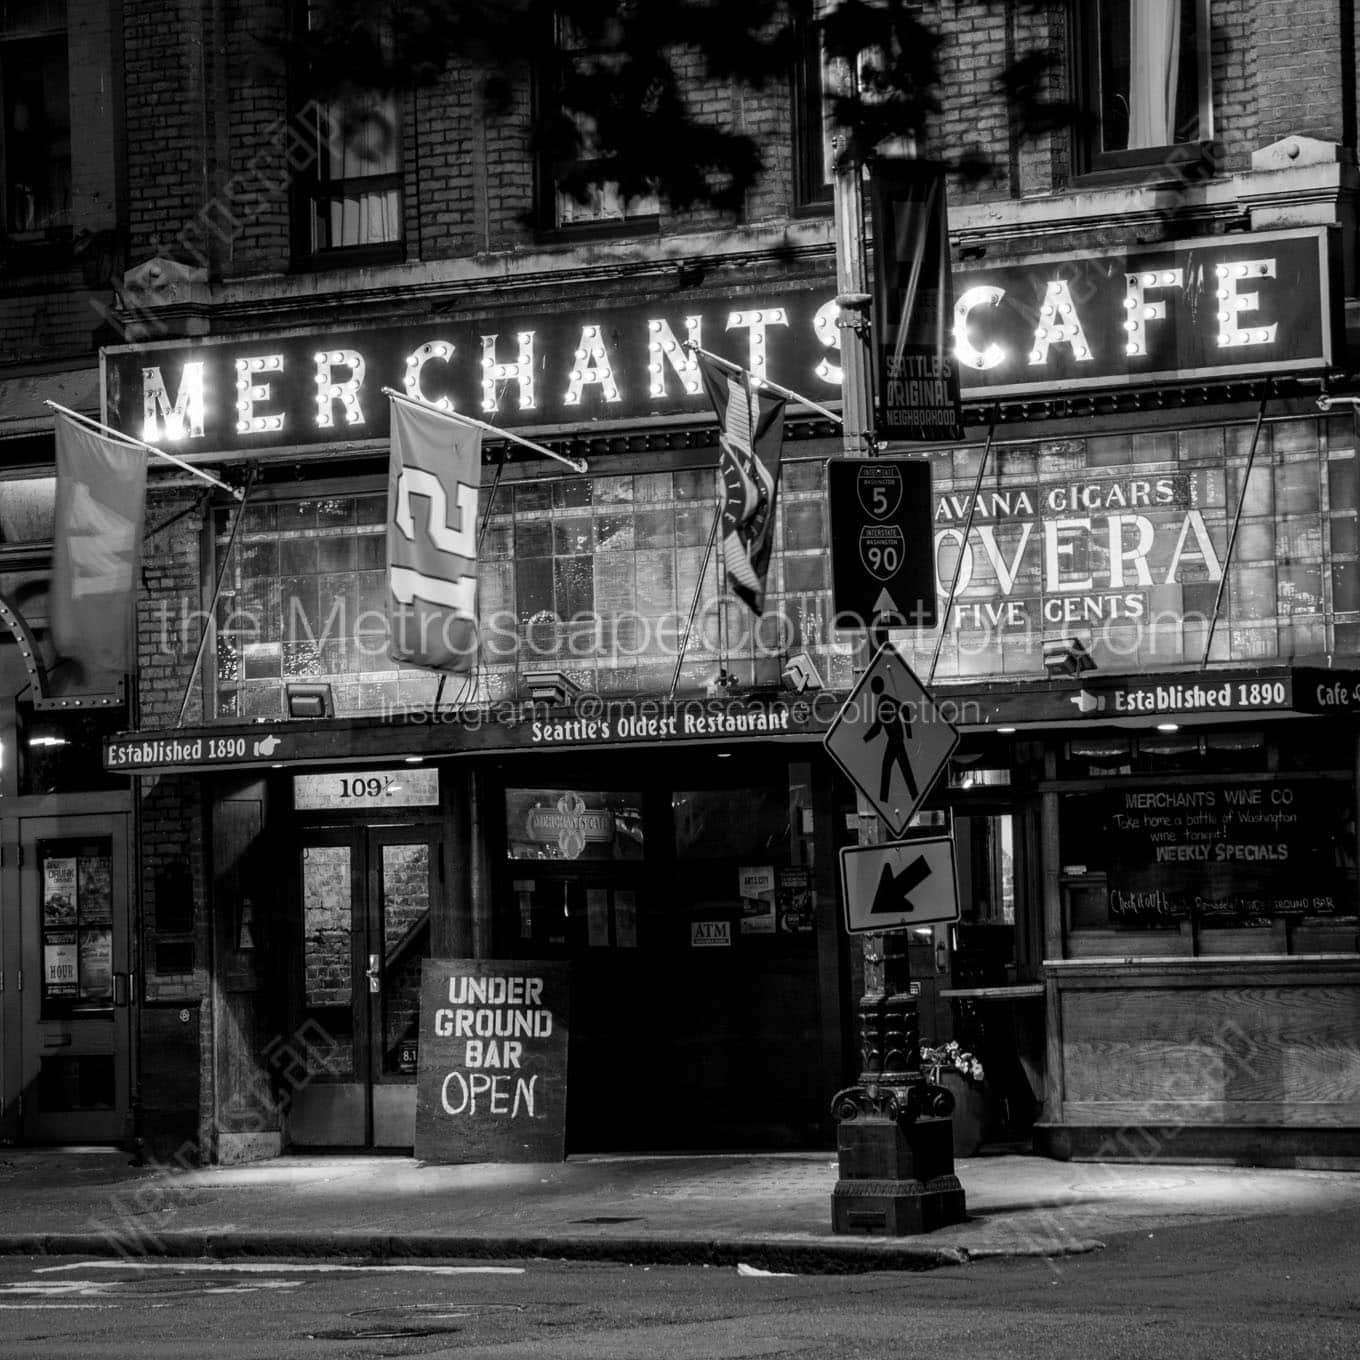 merchants cafe at night pioneer square Black & White Office Art